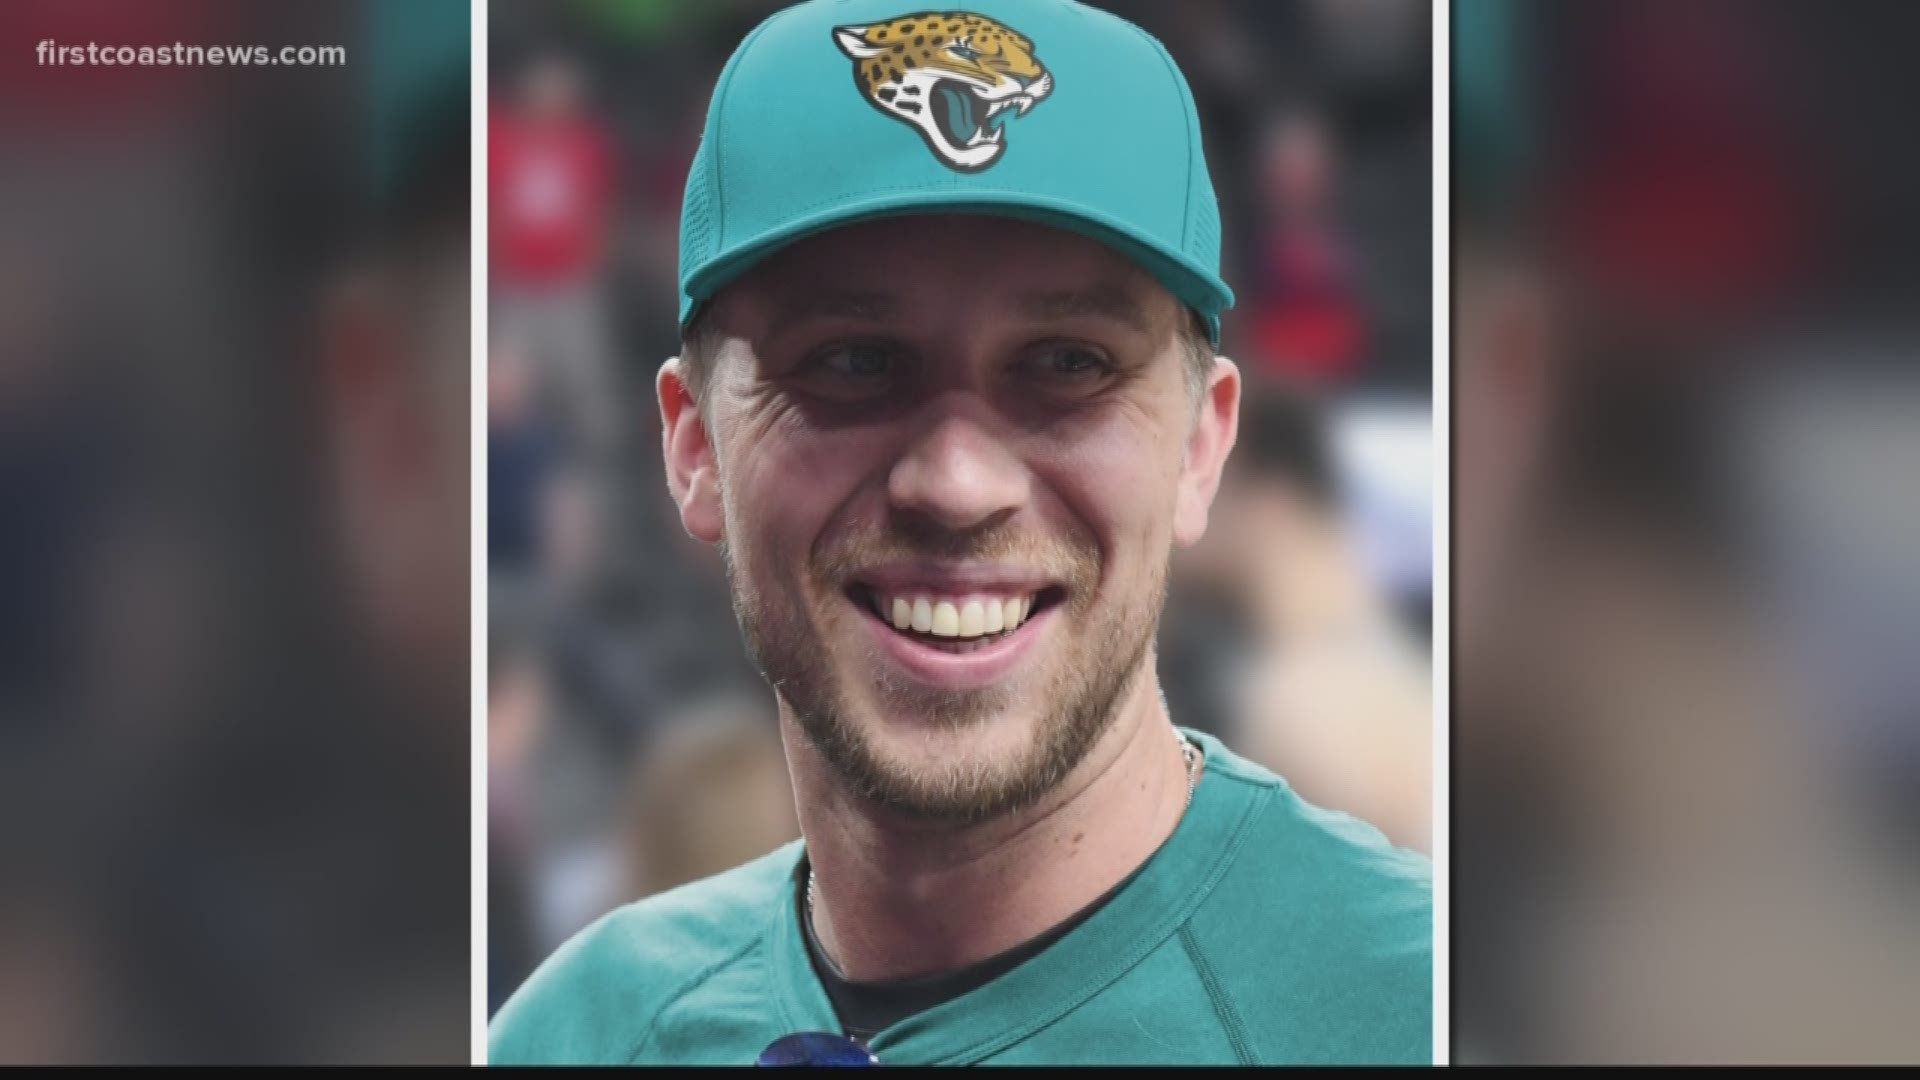 The Jacksonville Jaguars are signing former Super Bowl-winning quarterback Nick Foles to a contract, the NFL Network reported.